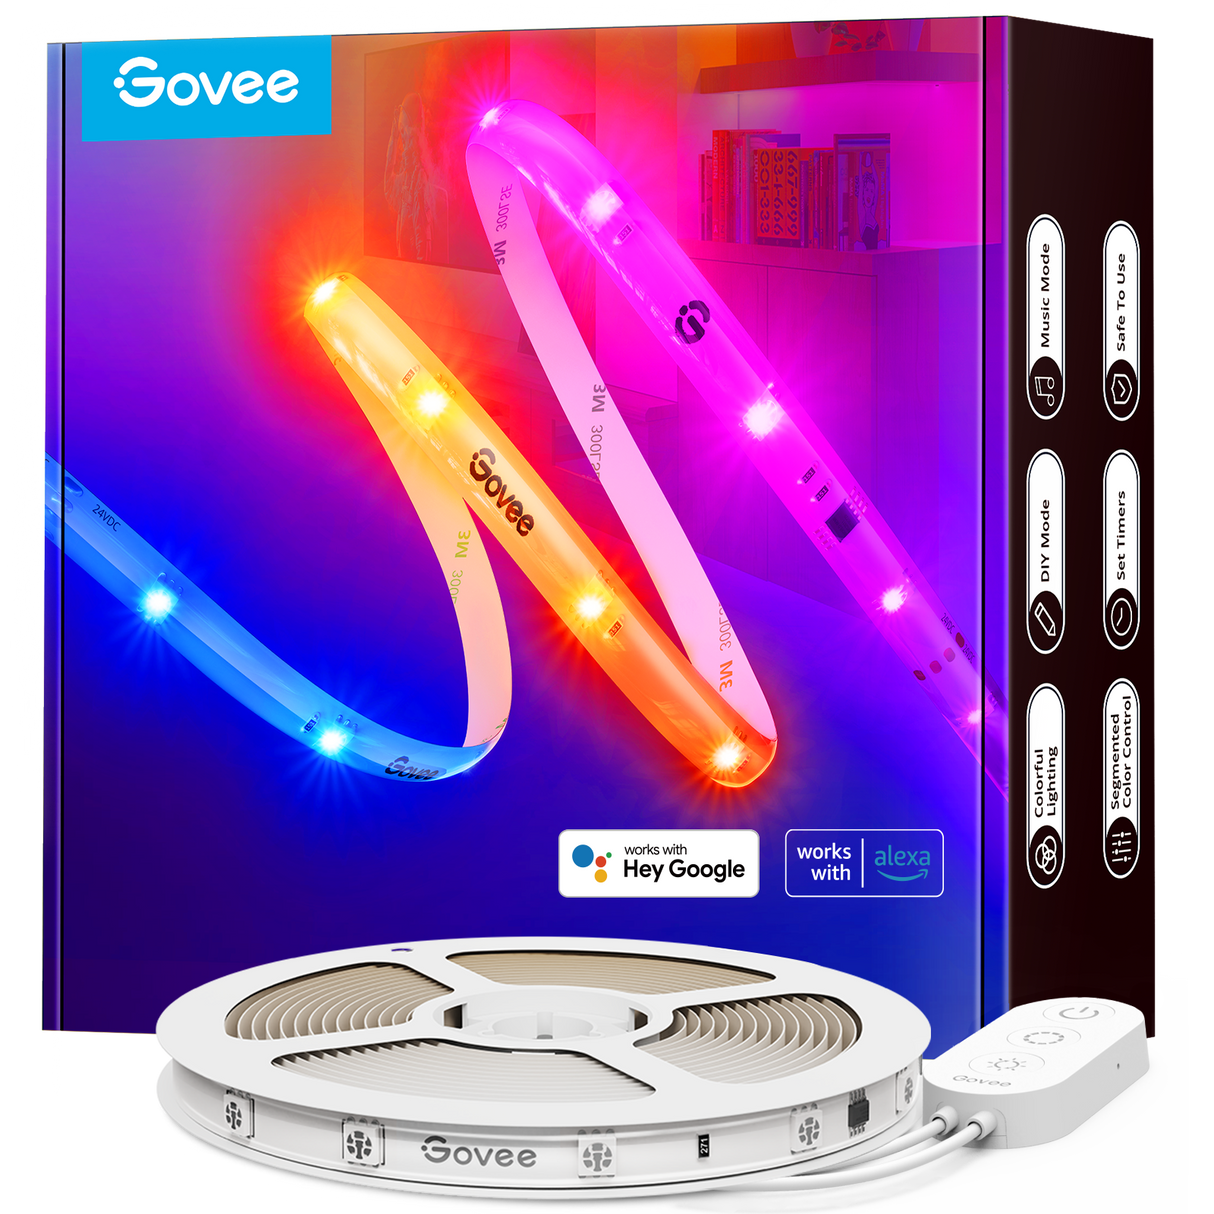 Govee Phantasy Outdoor Weather-proof Smart LED RGBIC Strip Lights